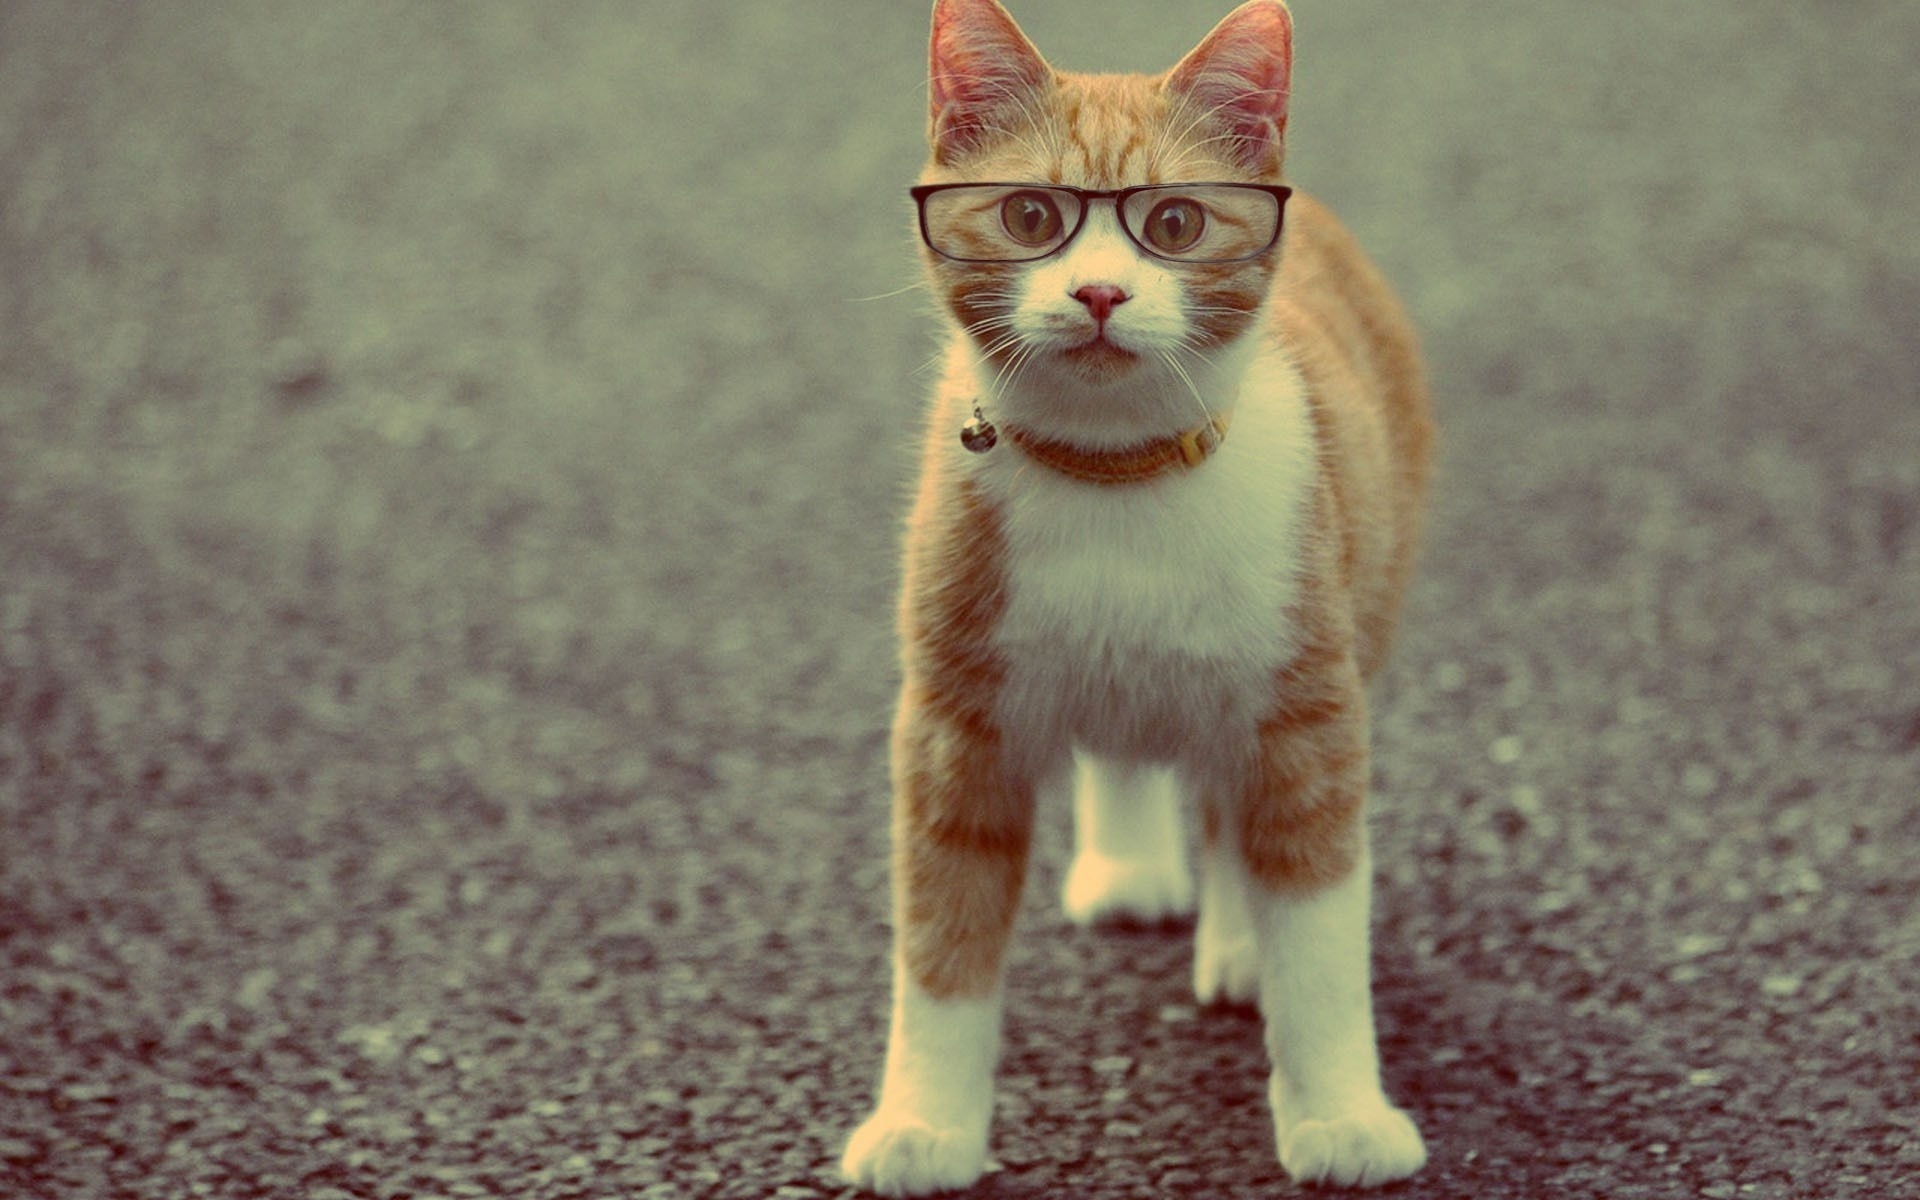 animals, Cats, Felines, Glasses, Humor, Funny, Cute, Eyes, Face